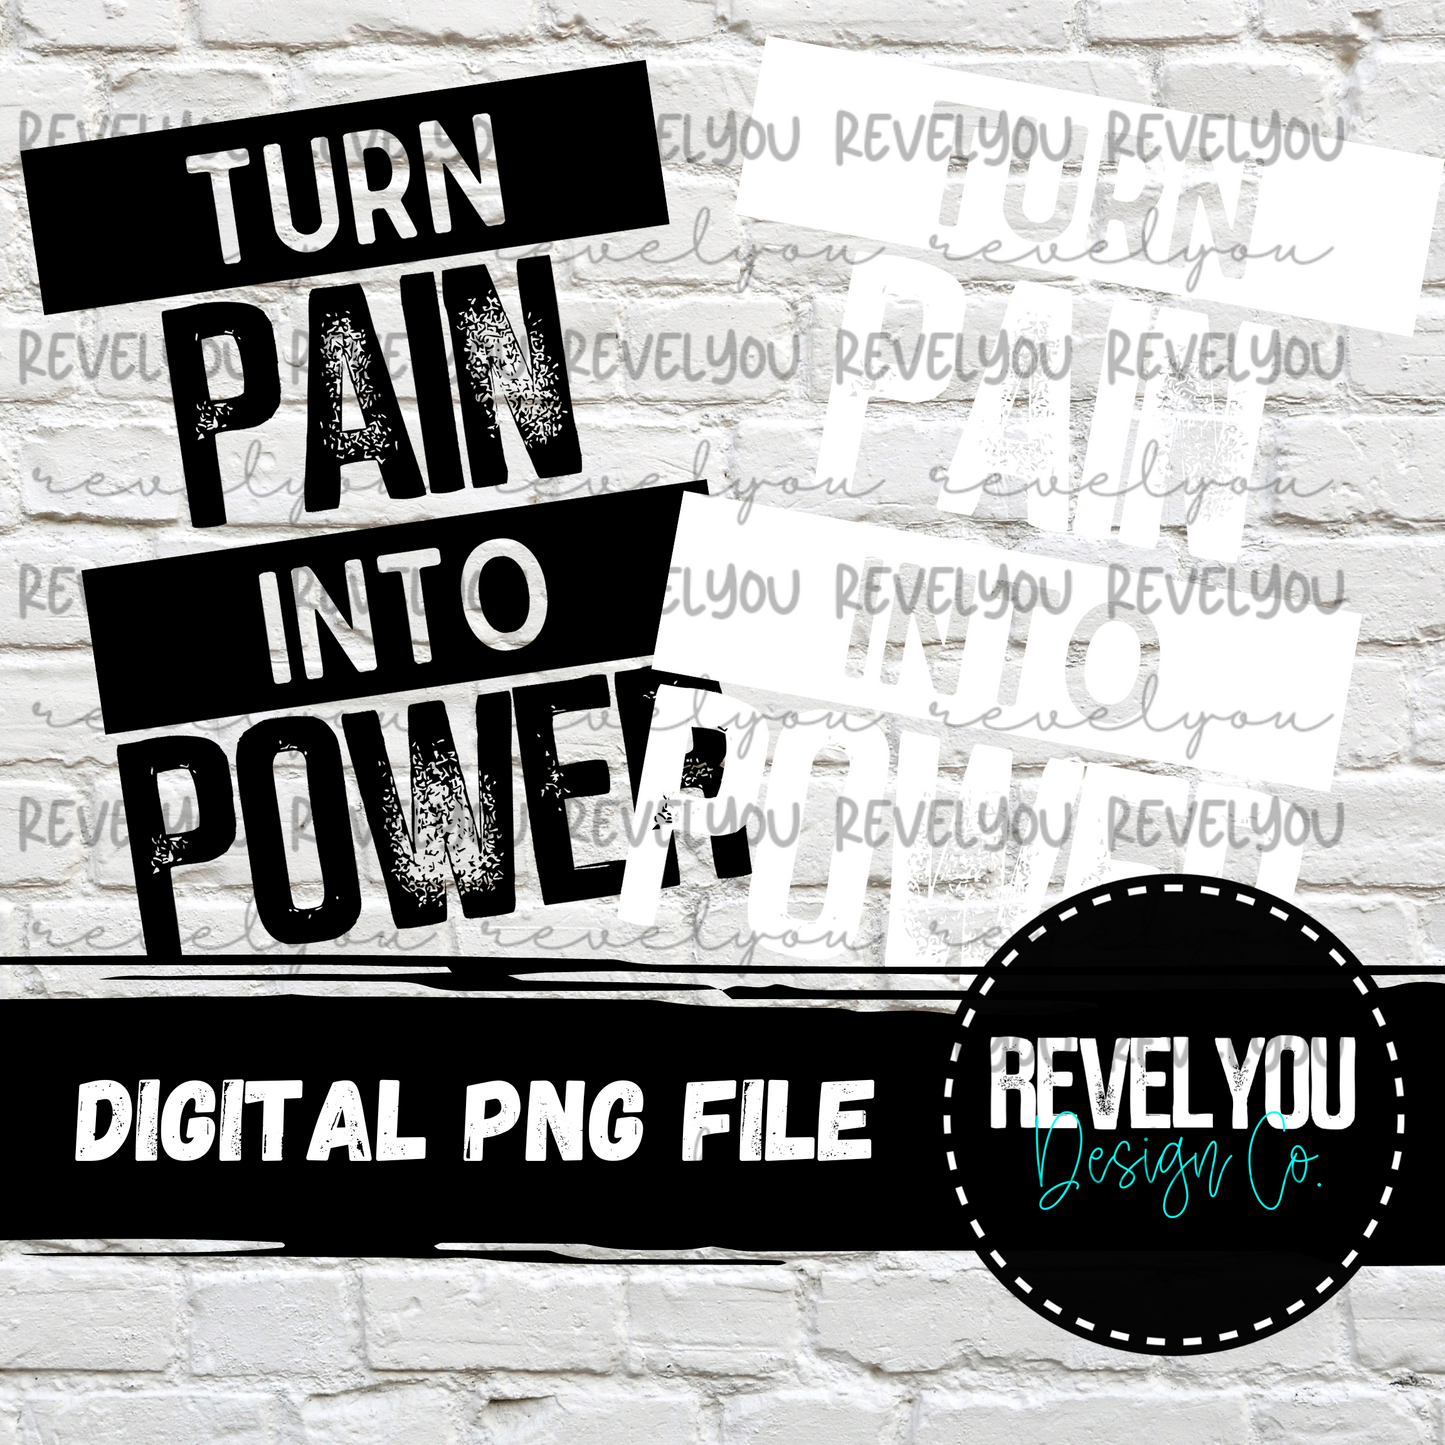 Turn Pain Into Power (Black and White Files) - PNG